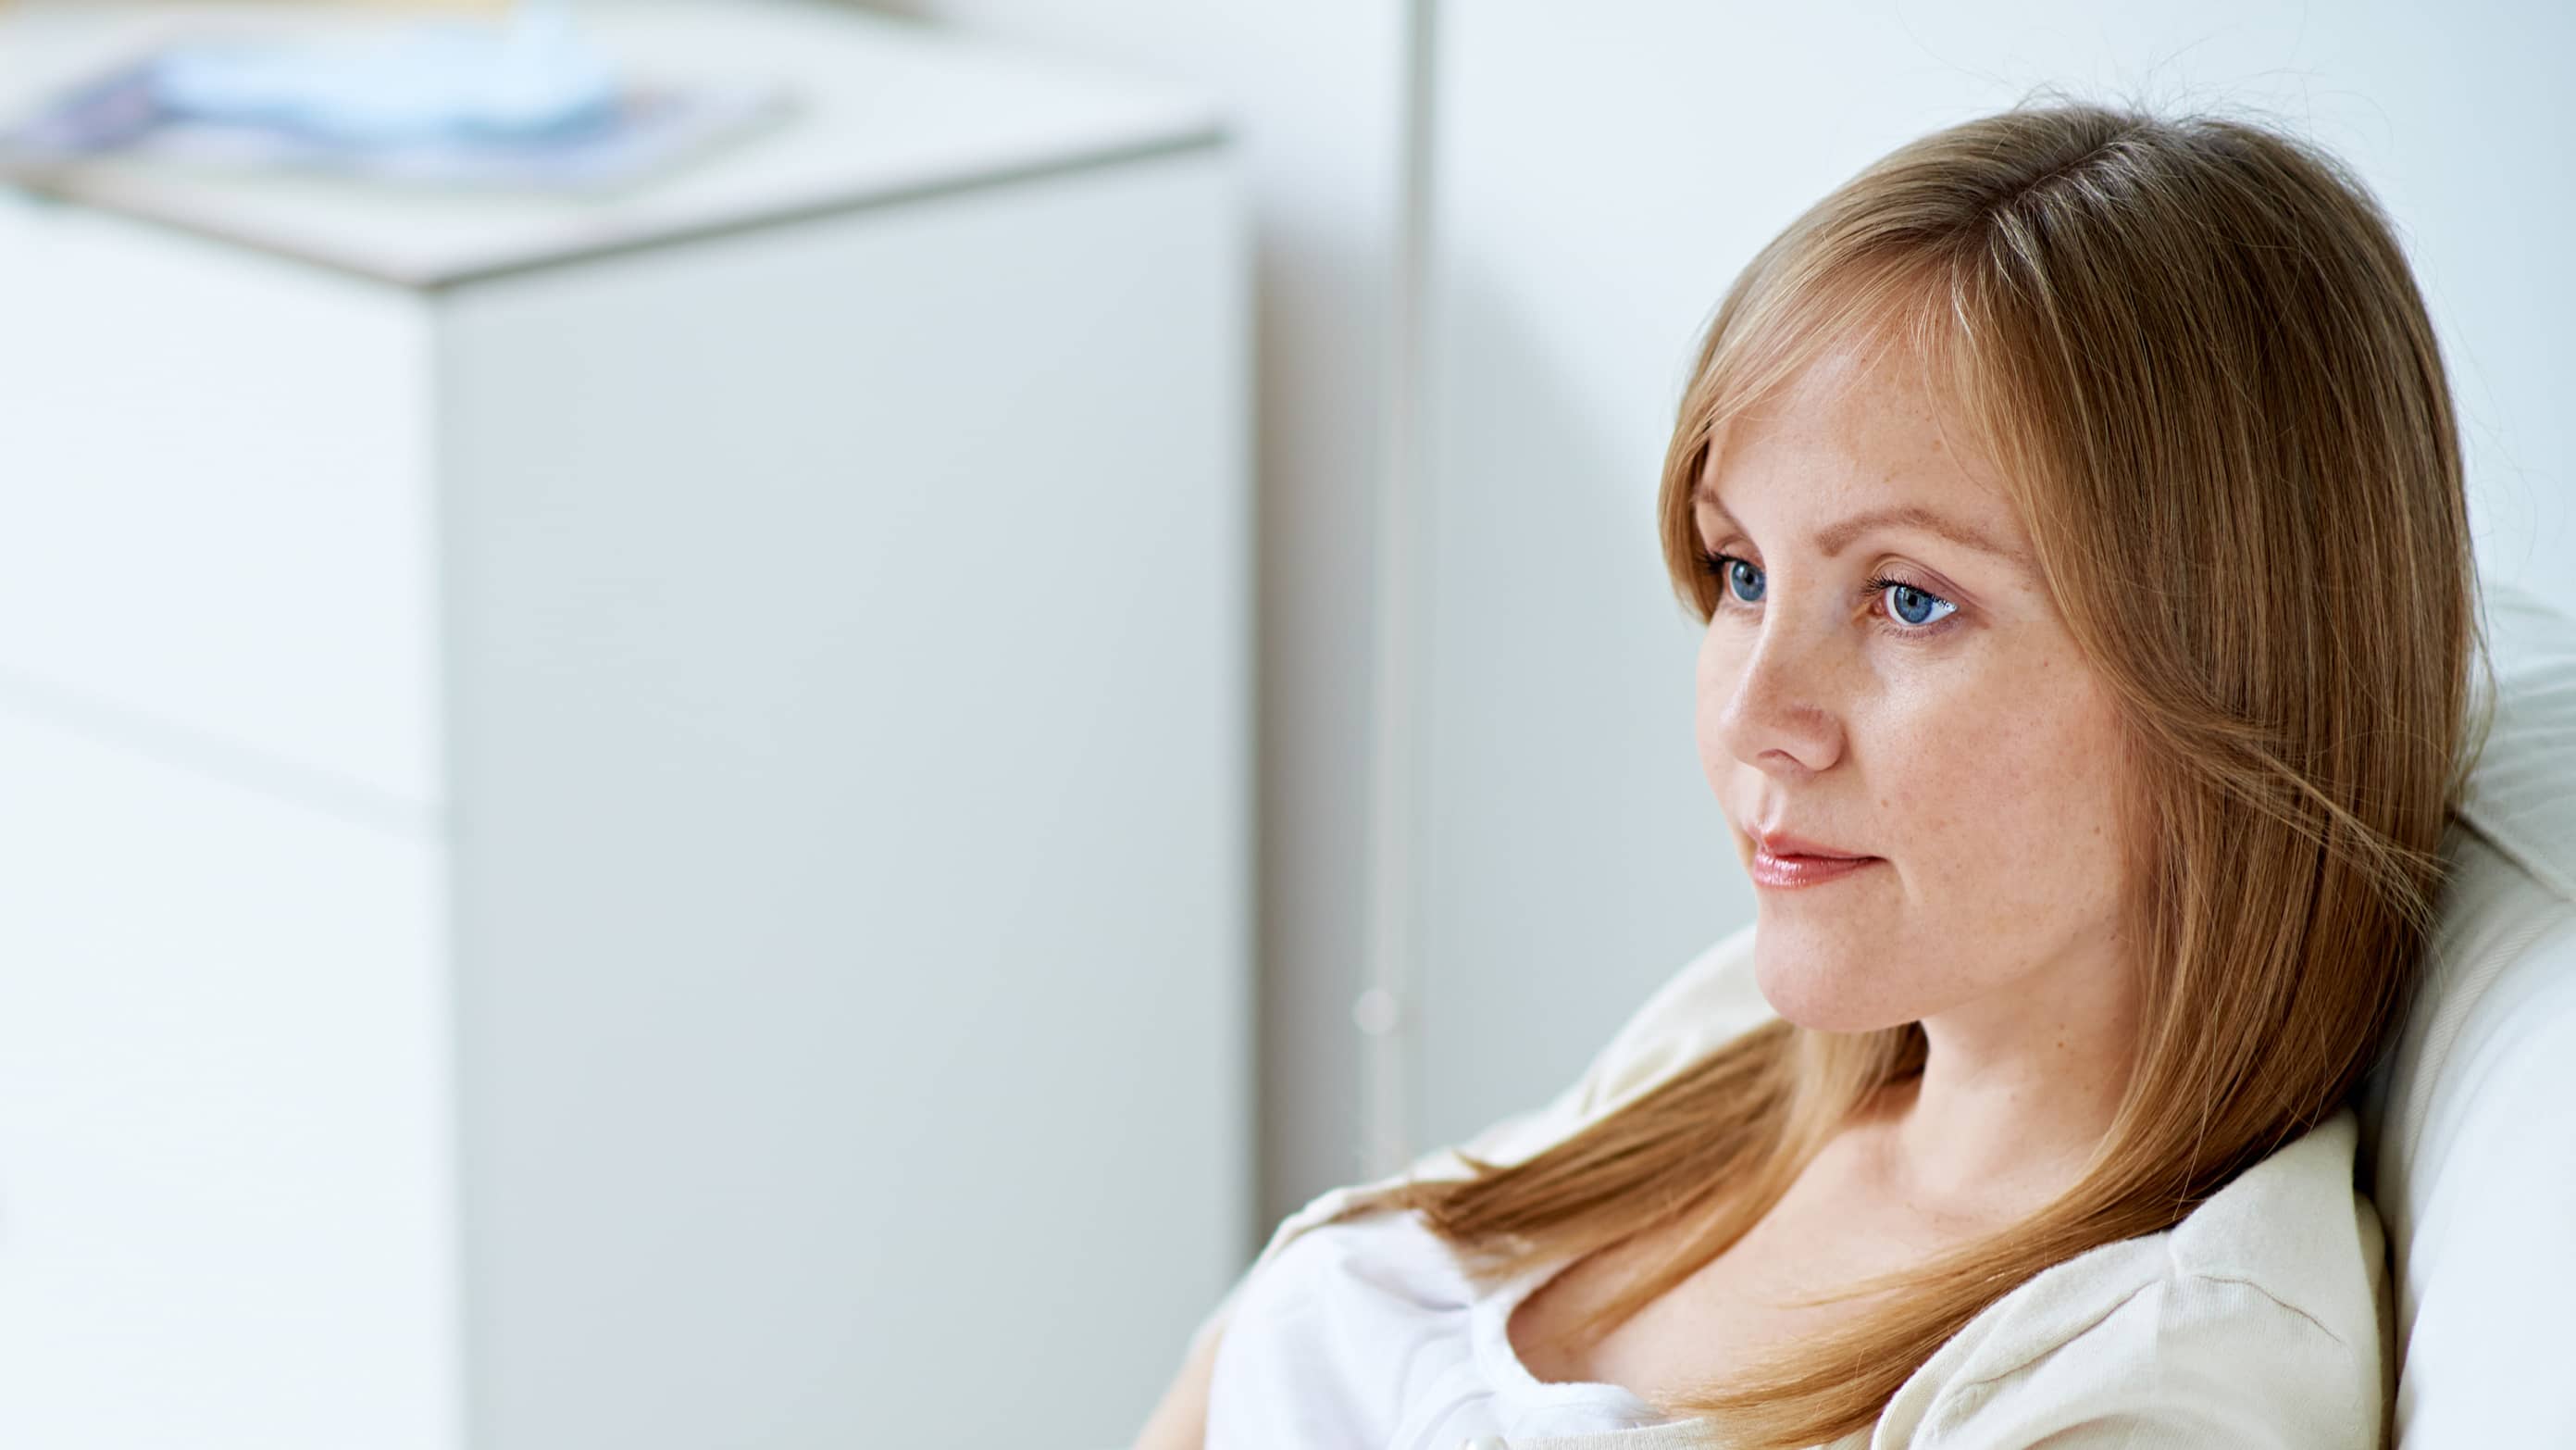 a woman looks concerned, possibly because of recurrent pregnancy loss.